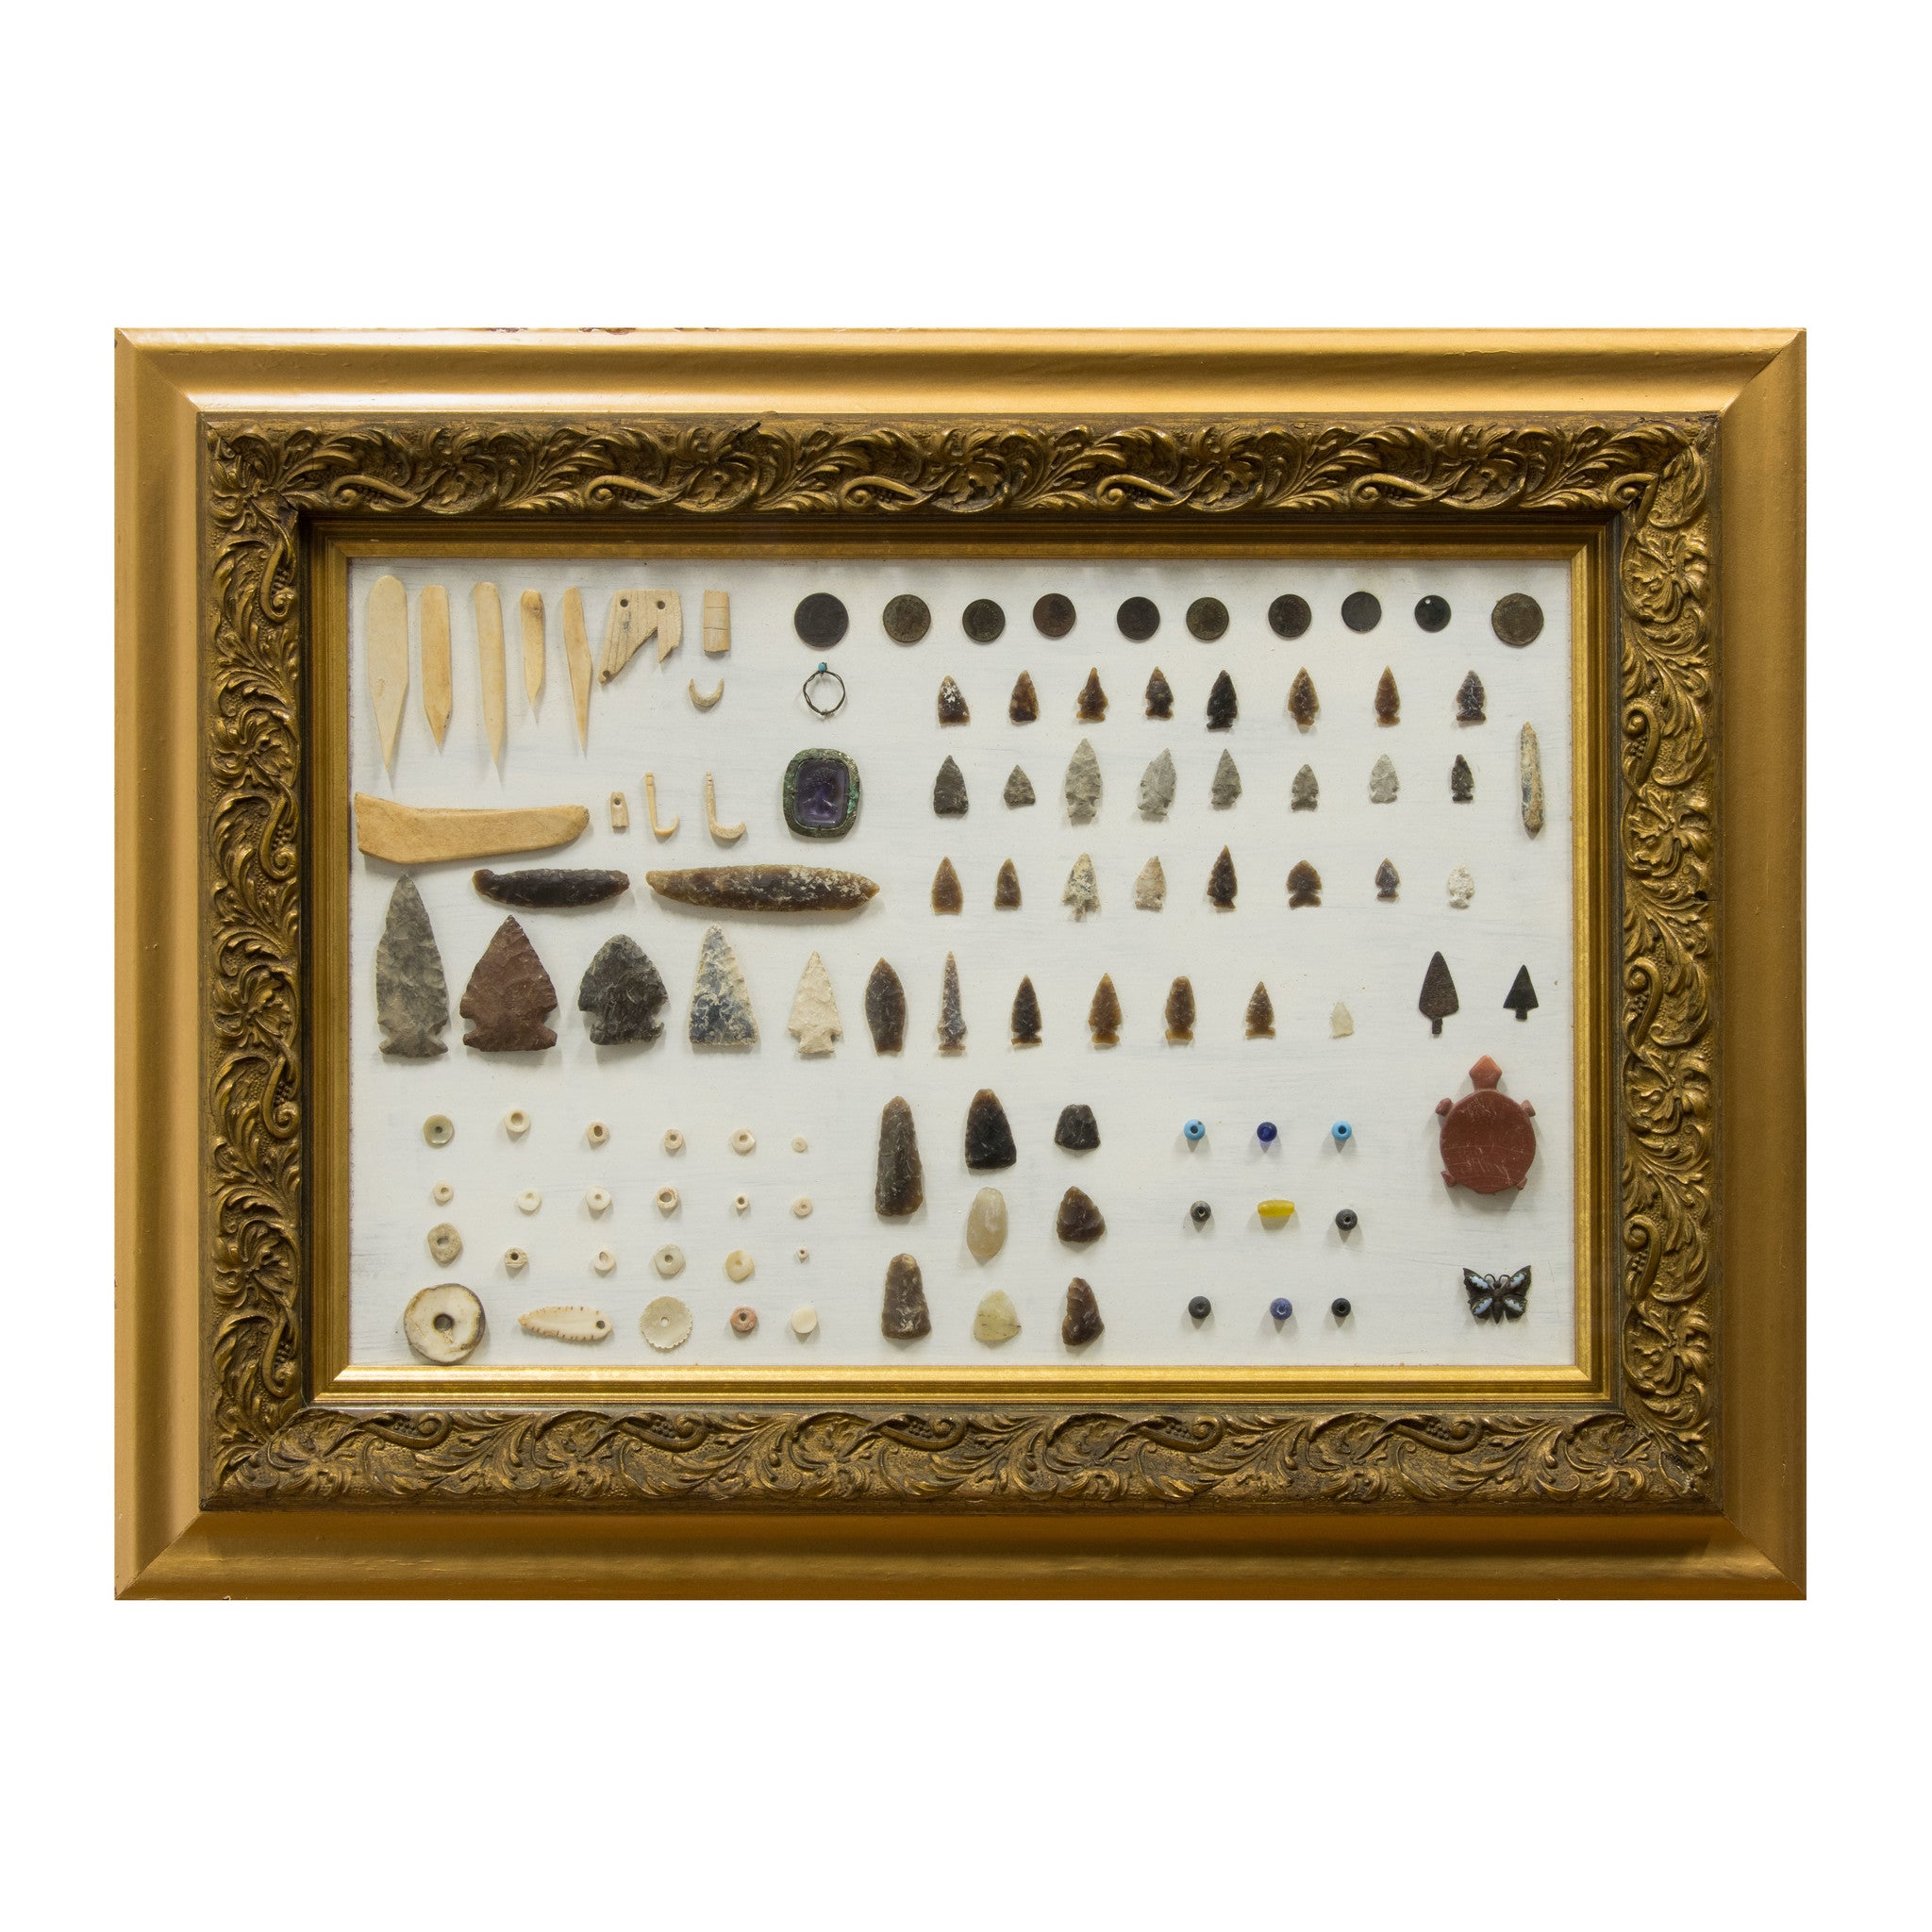 The Haven's Site - Archeological Finds Collection, Native, Stone and Tools, Bone